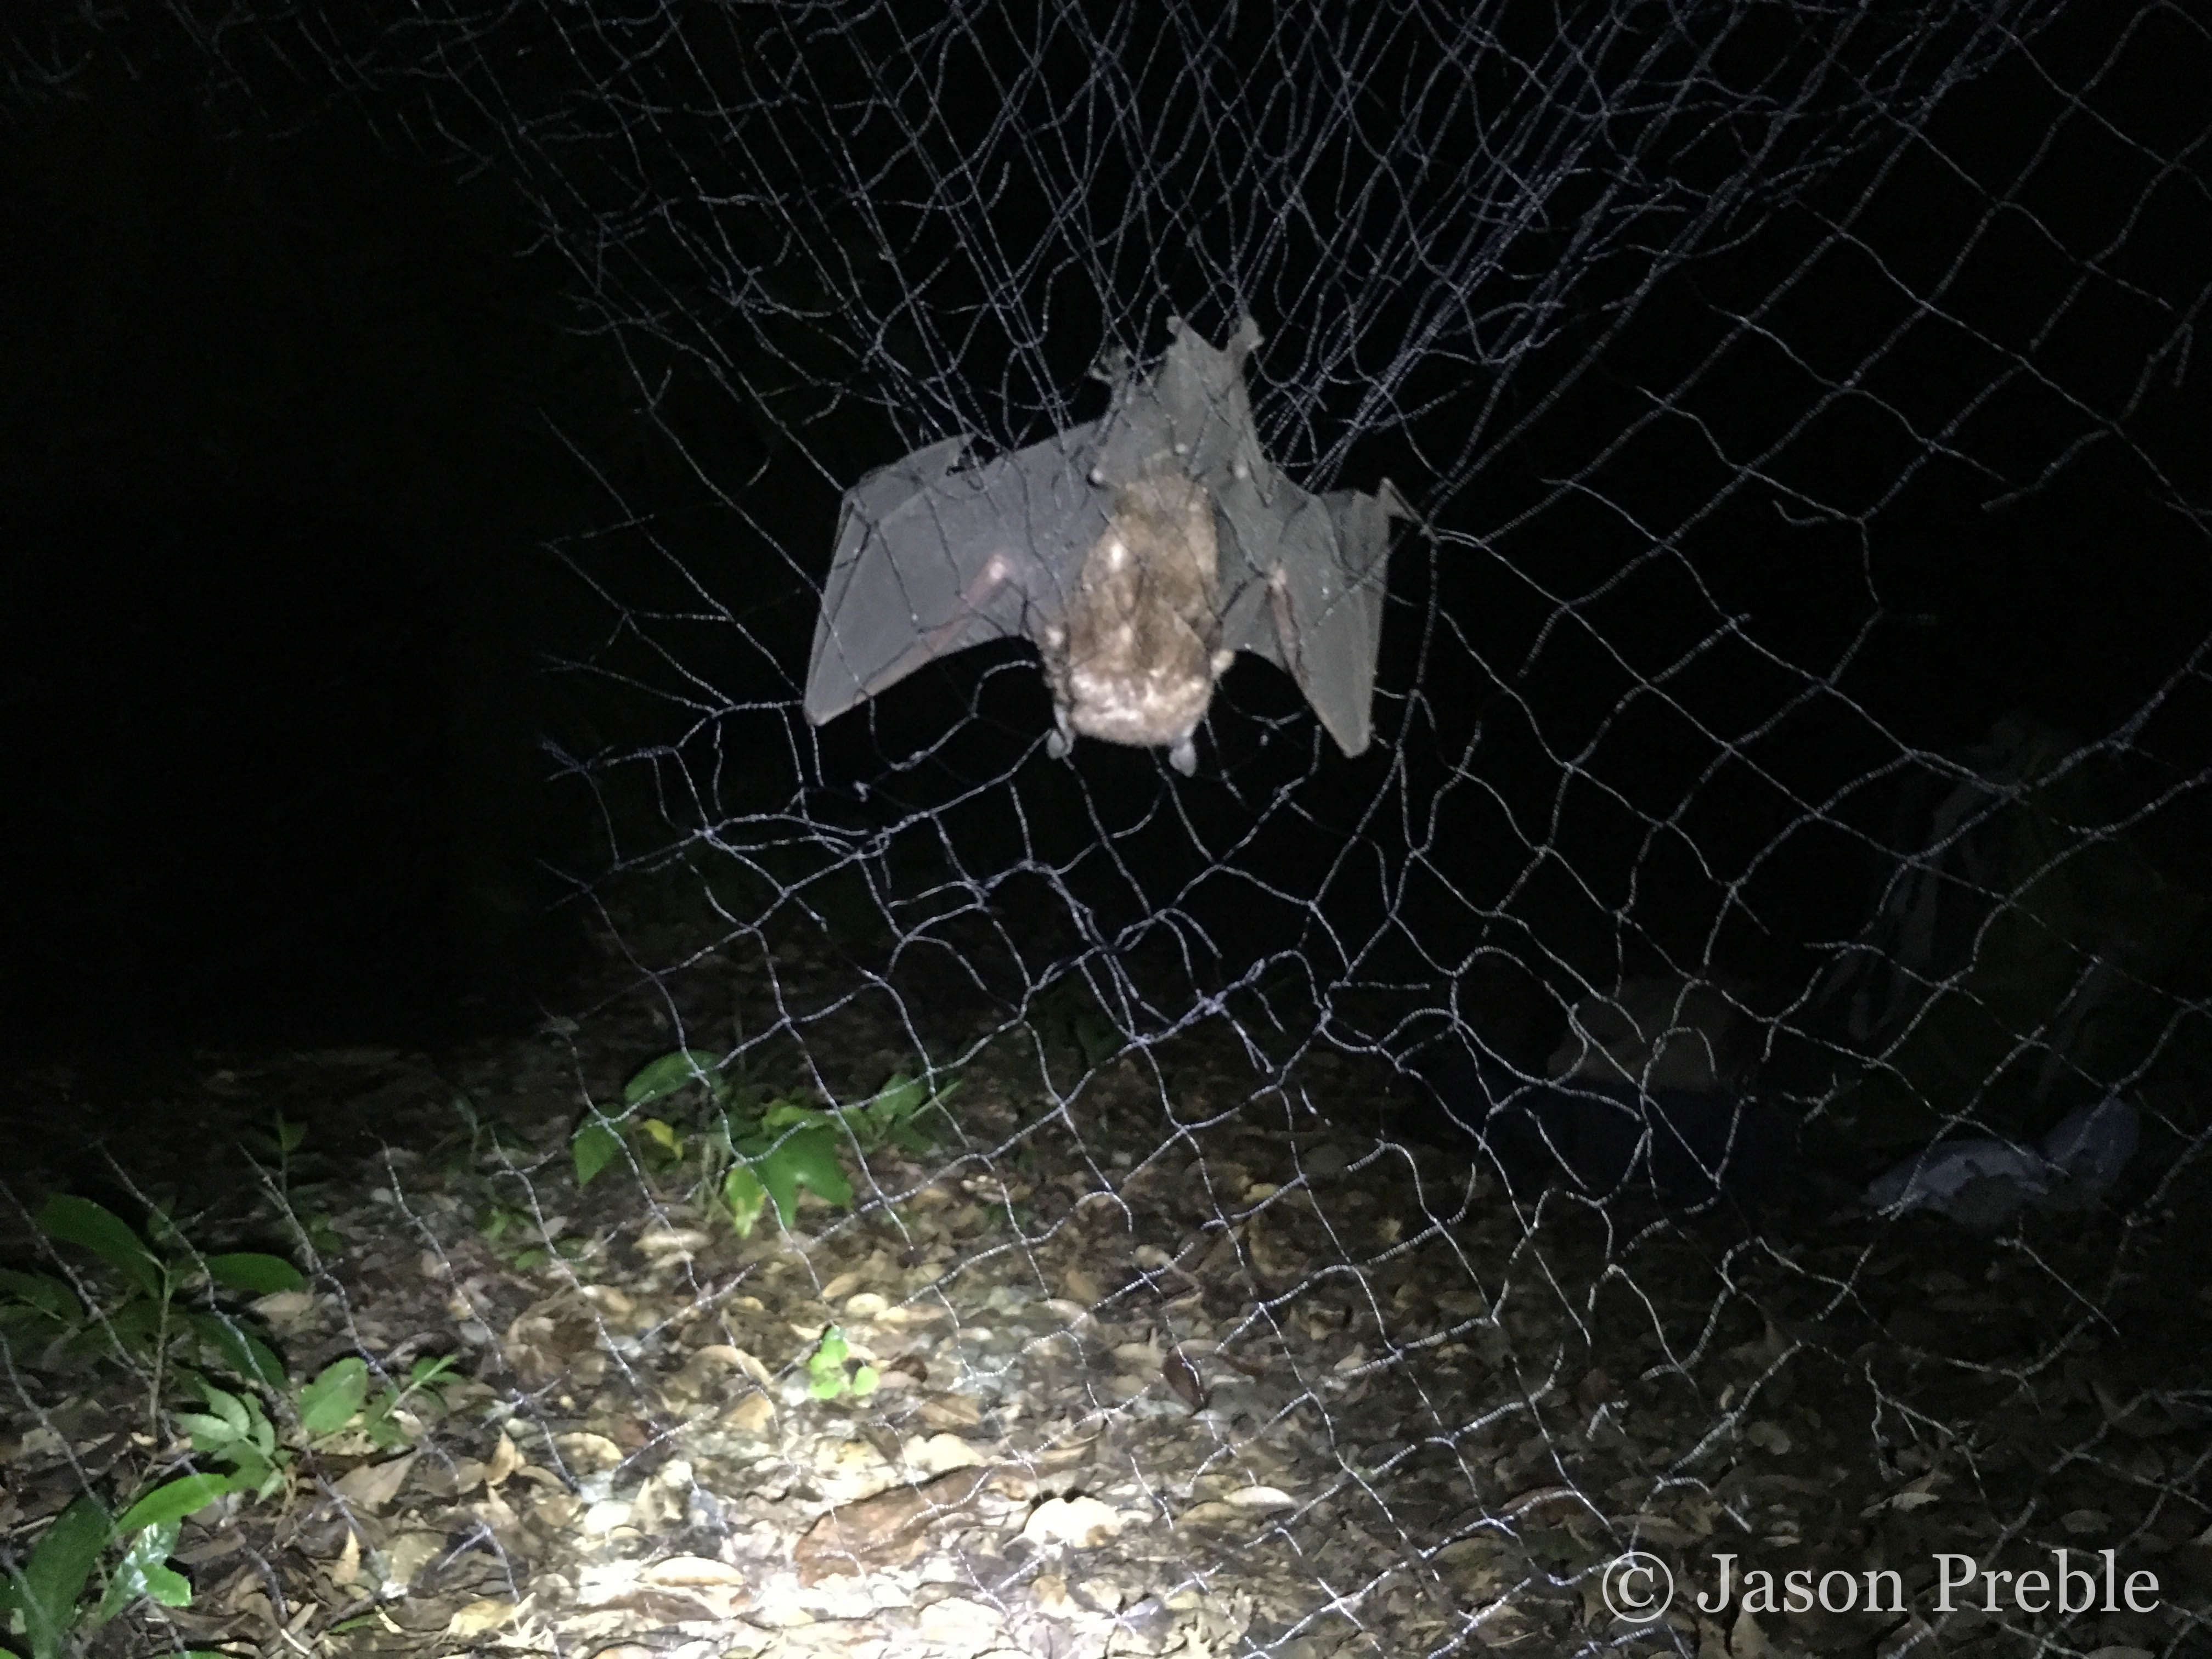 How To Catch A Bat コウモリを捕獲する方法 Experiment